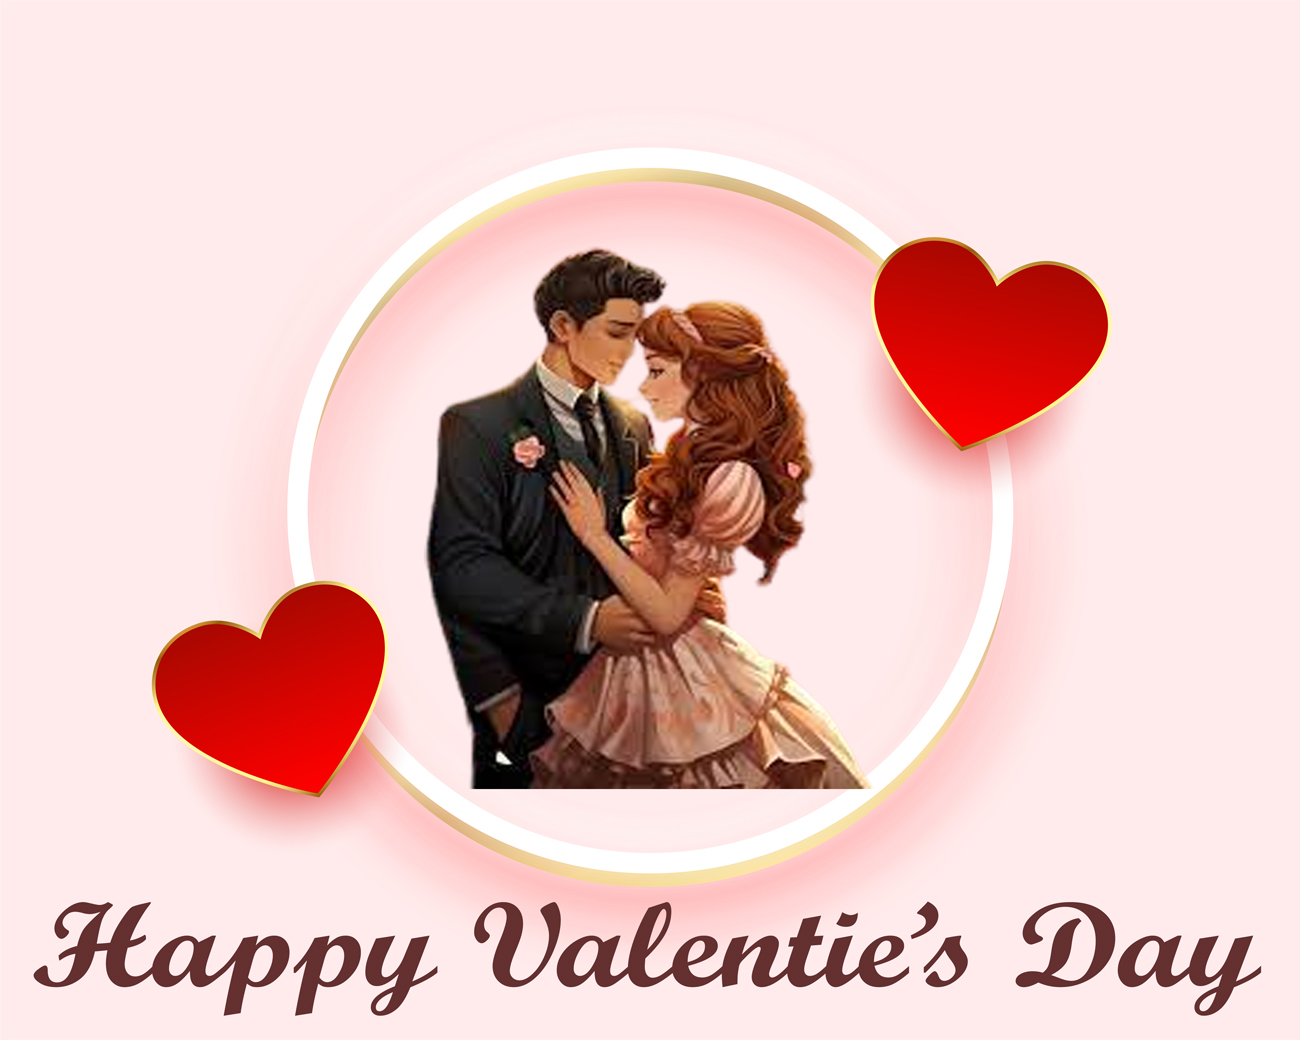 Valentine’s Card with Romantic Couples